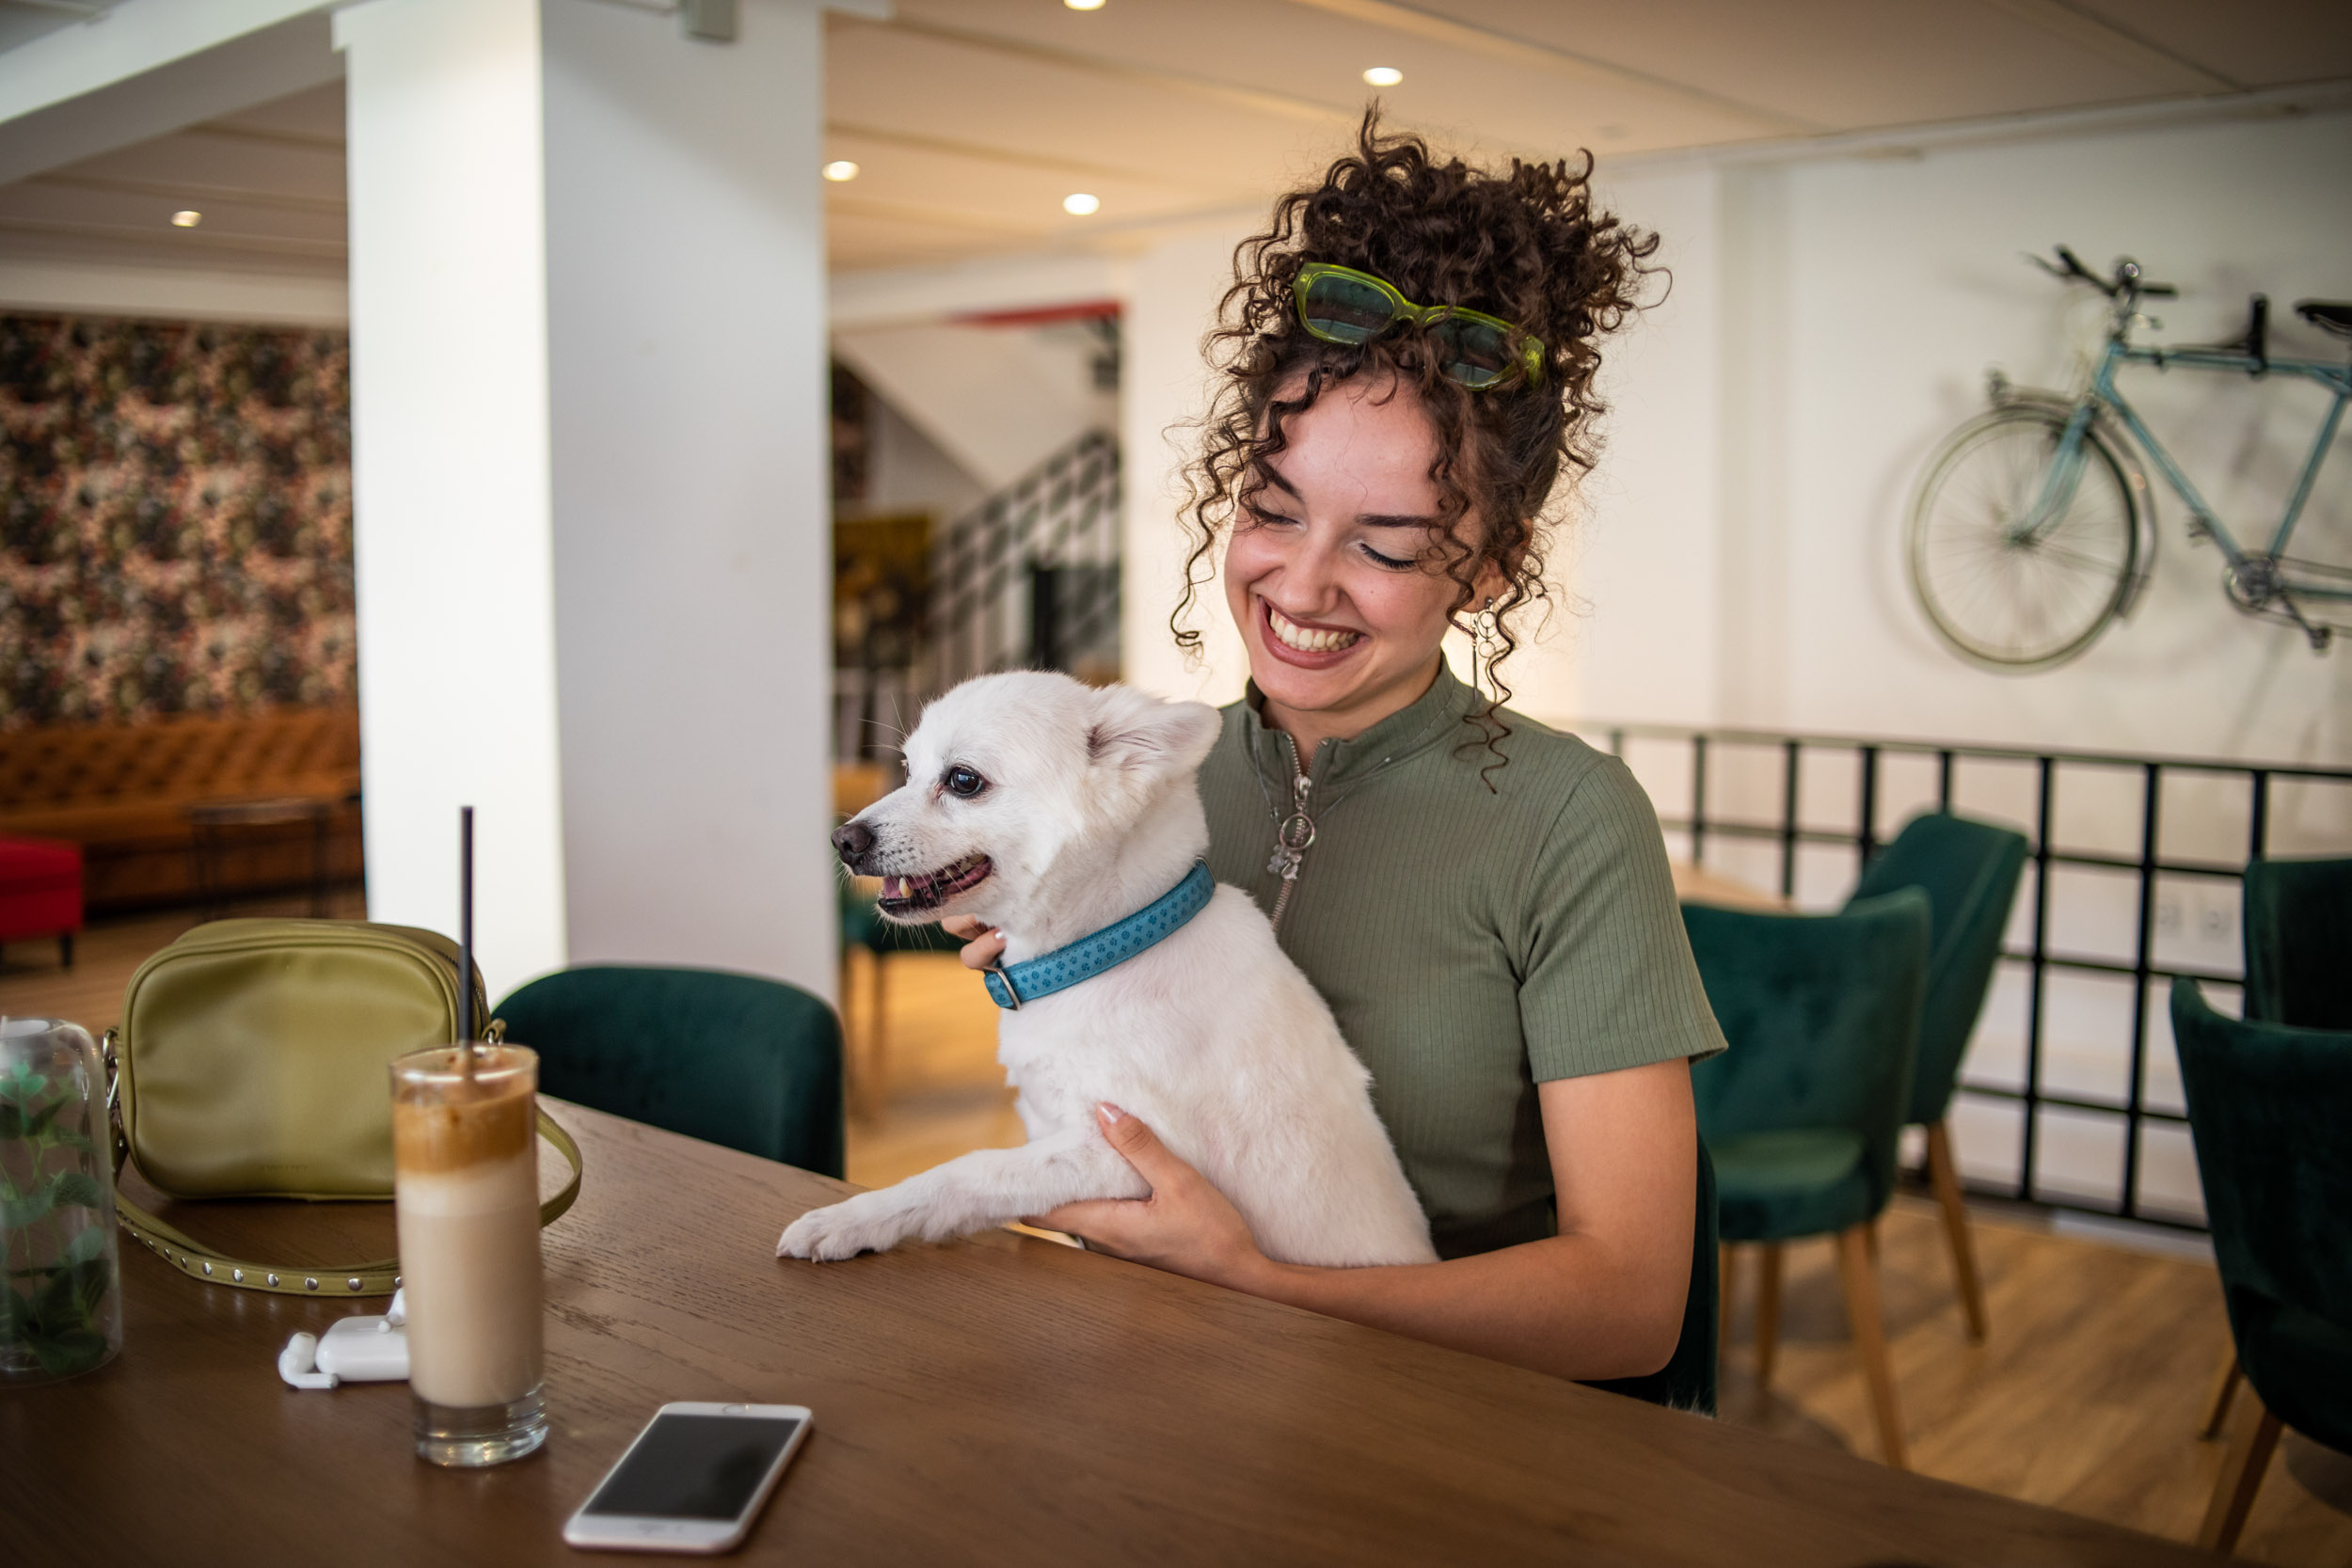 09 Girl Smiling and Holding White Dog on Table